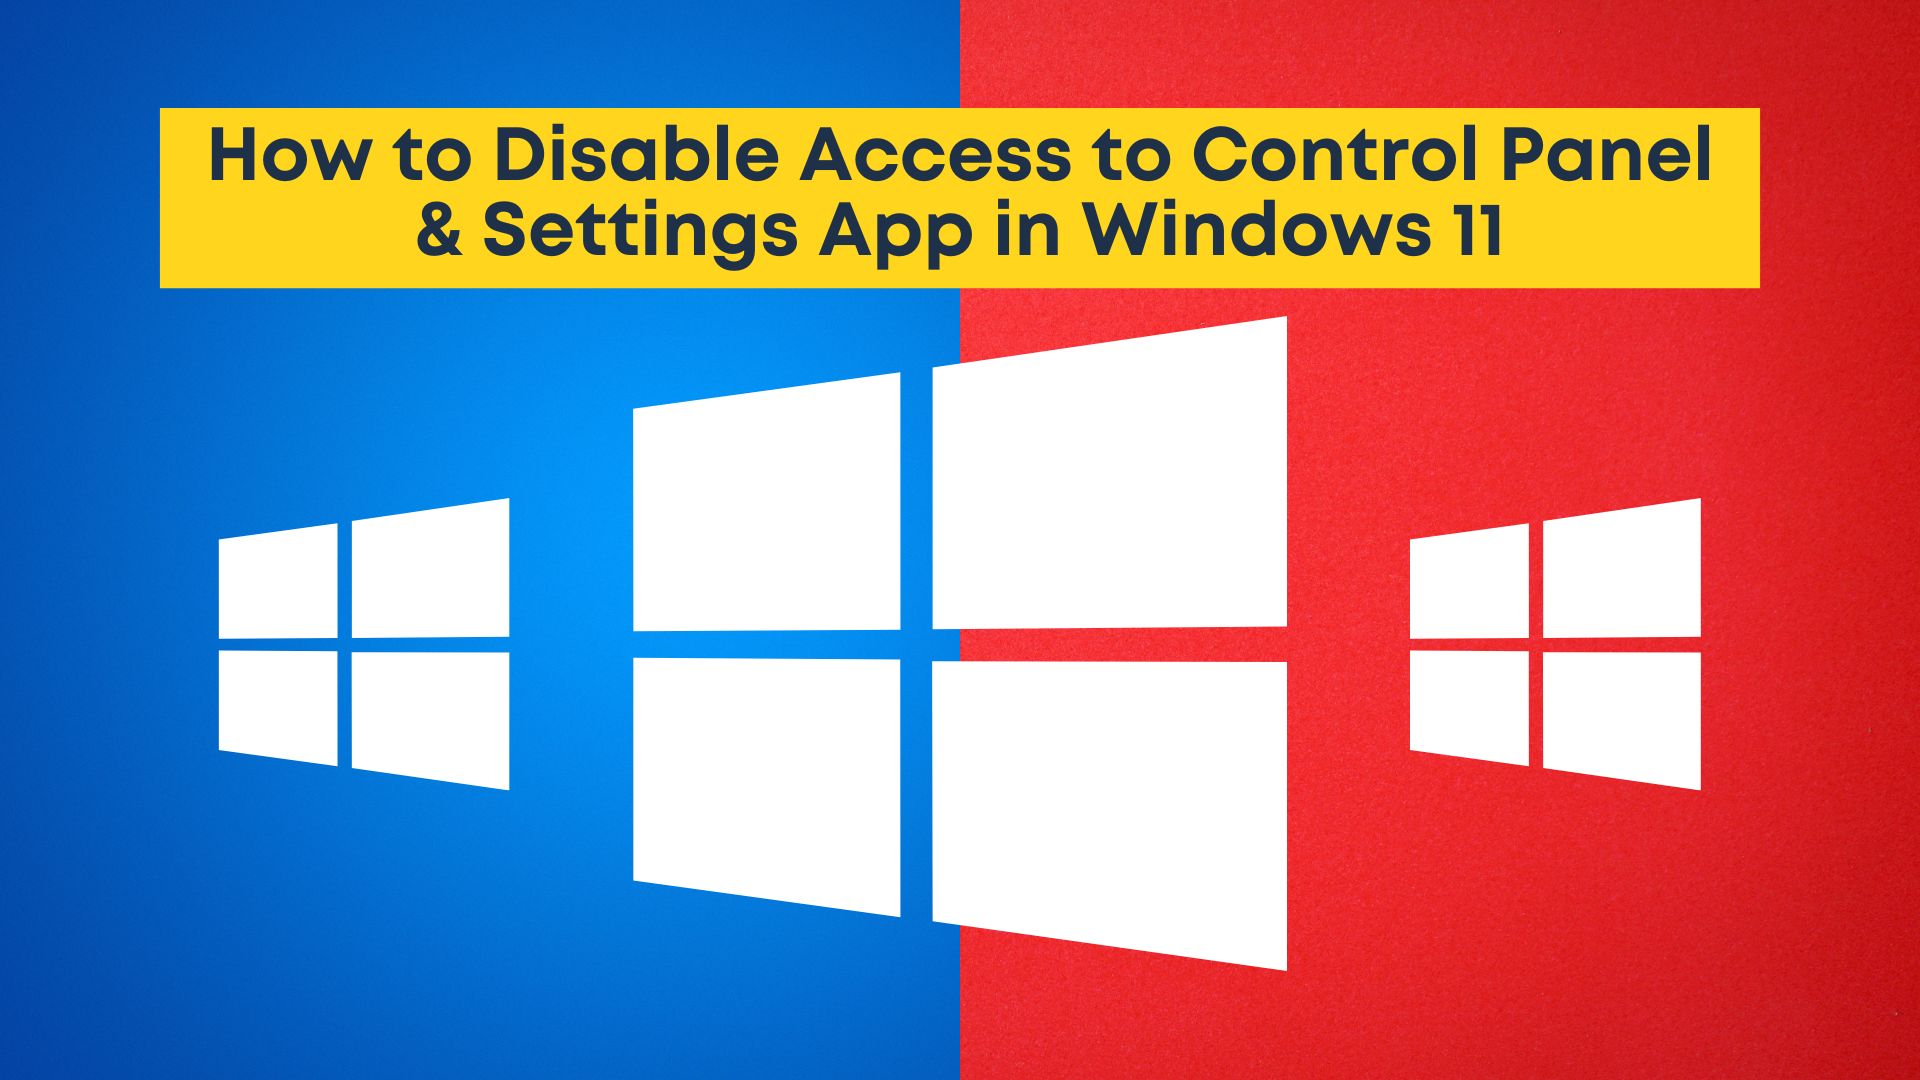 Disable Access to Control Panel and Settings App in Windows